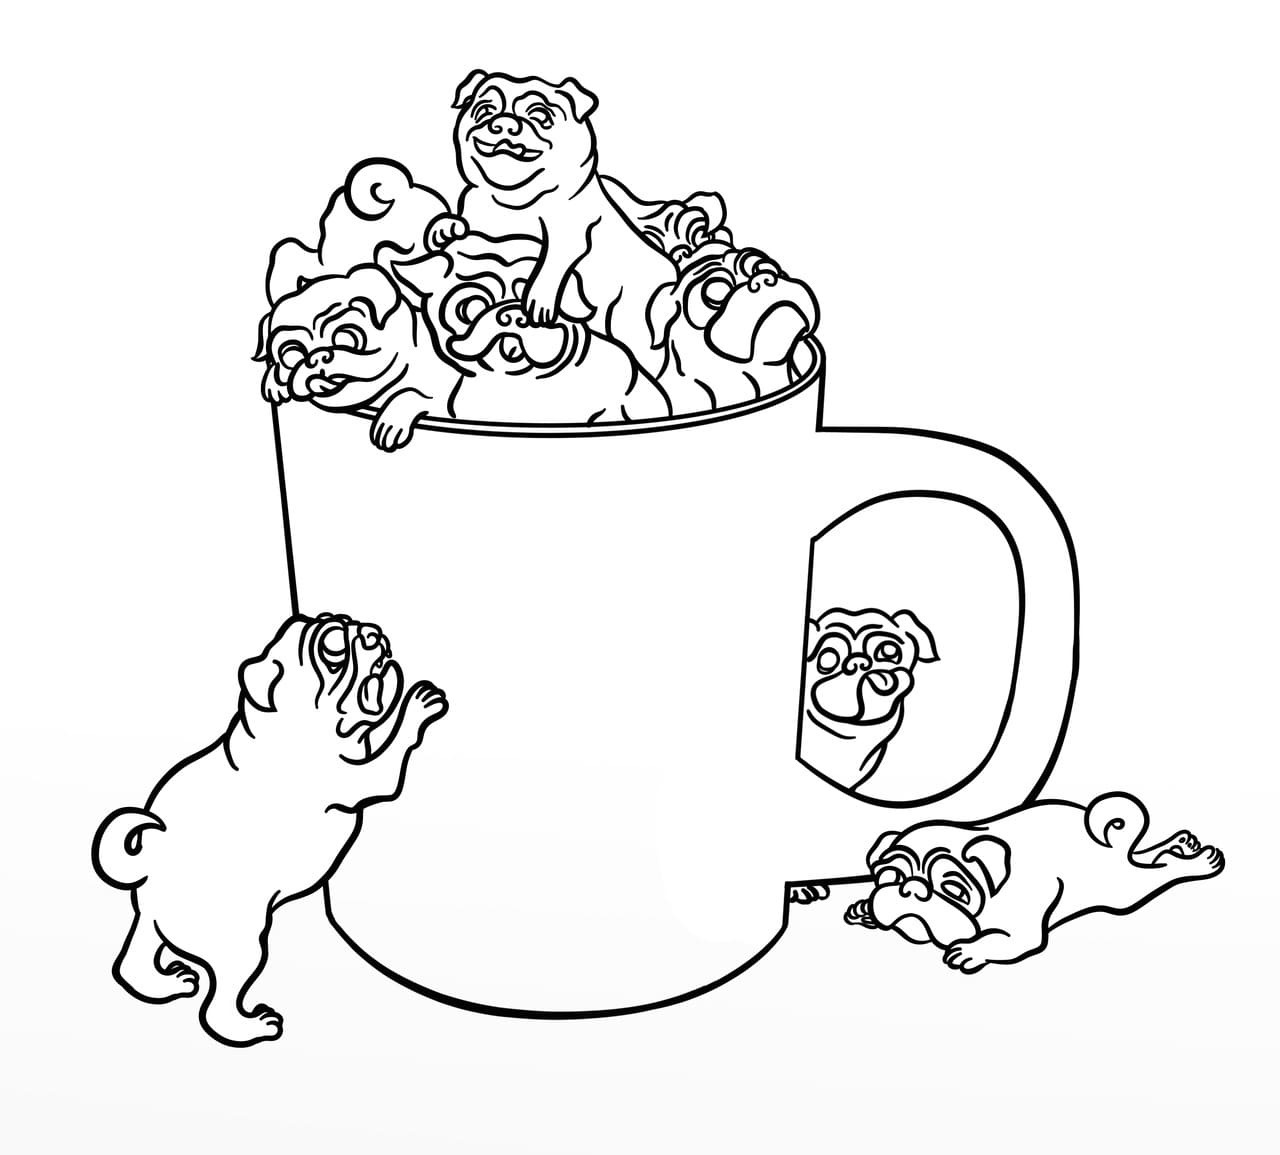 Pug in a Cup Coloring Sheets Coloring Page